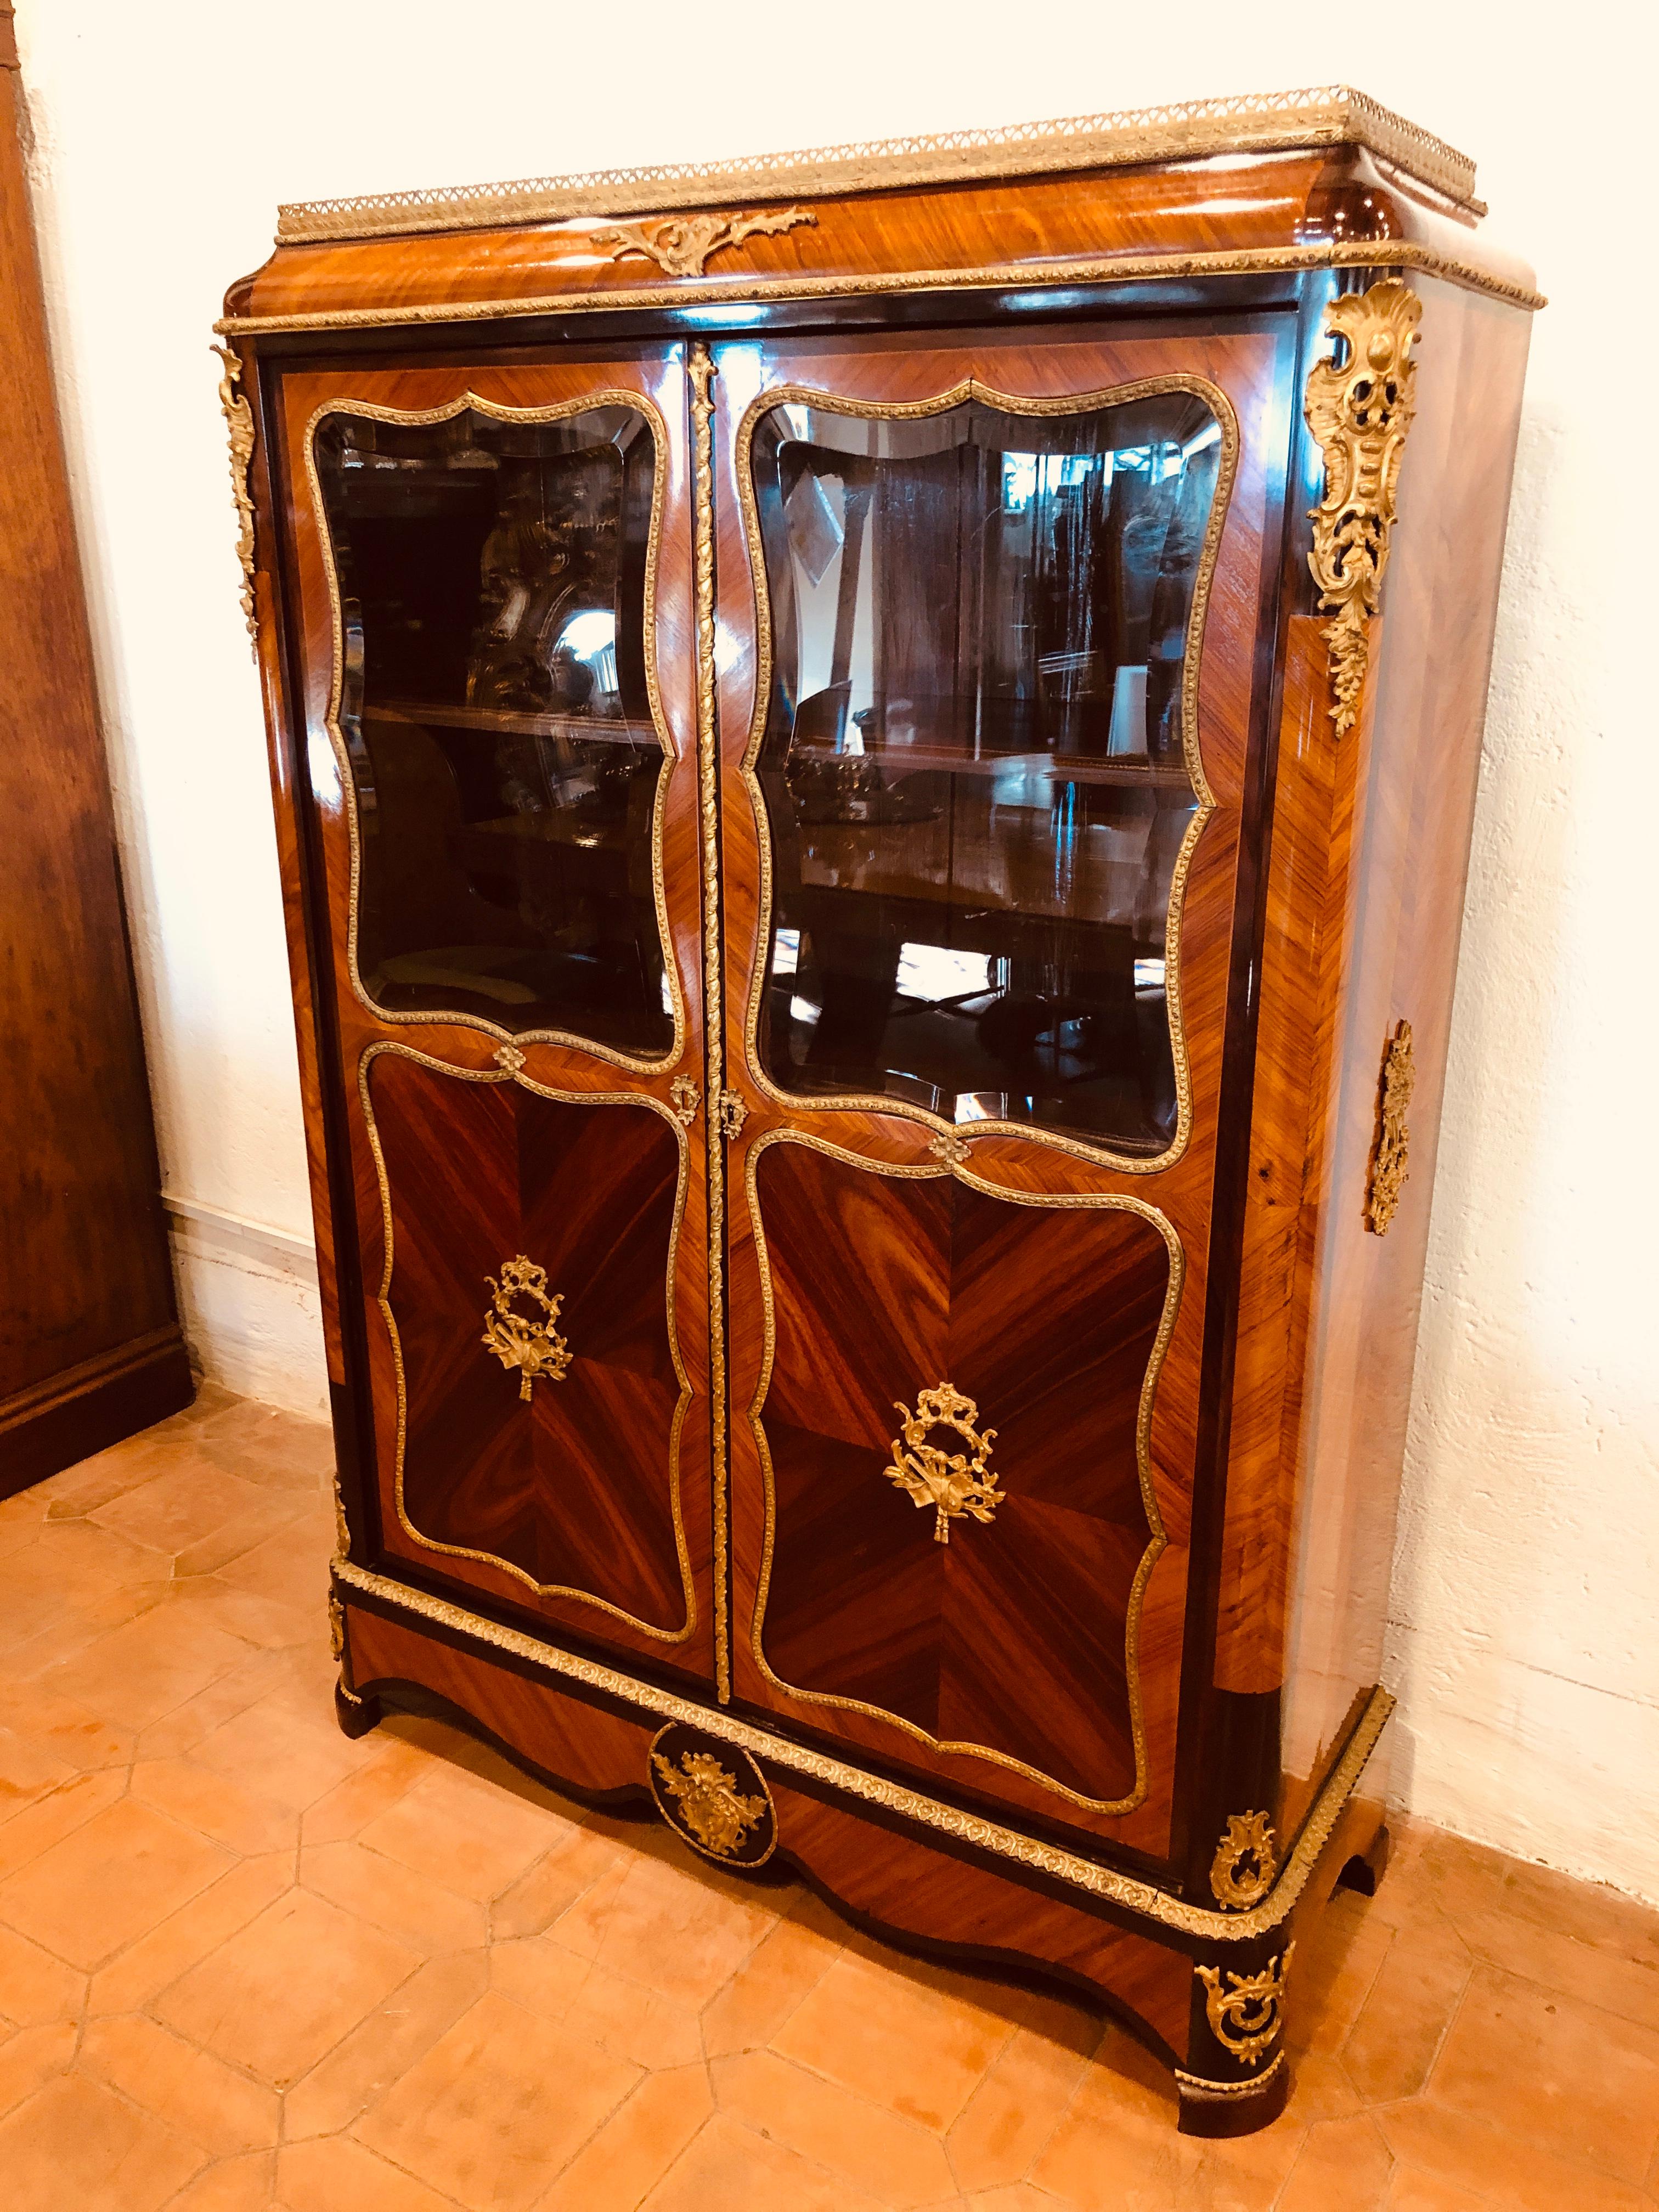 Fantastic cabinet from France, Louis XV style, excellent proportions, fantastic game of wood on the front and on the sides. Purple ebony and rose wood, applications in gilded bronze, circa 1840. Restored.